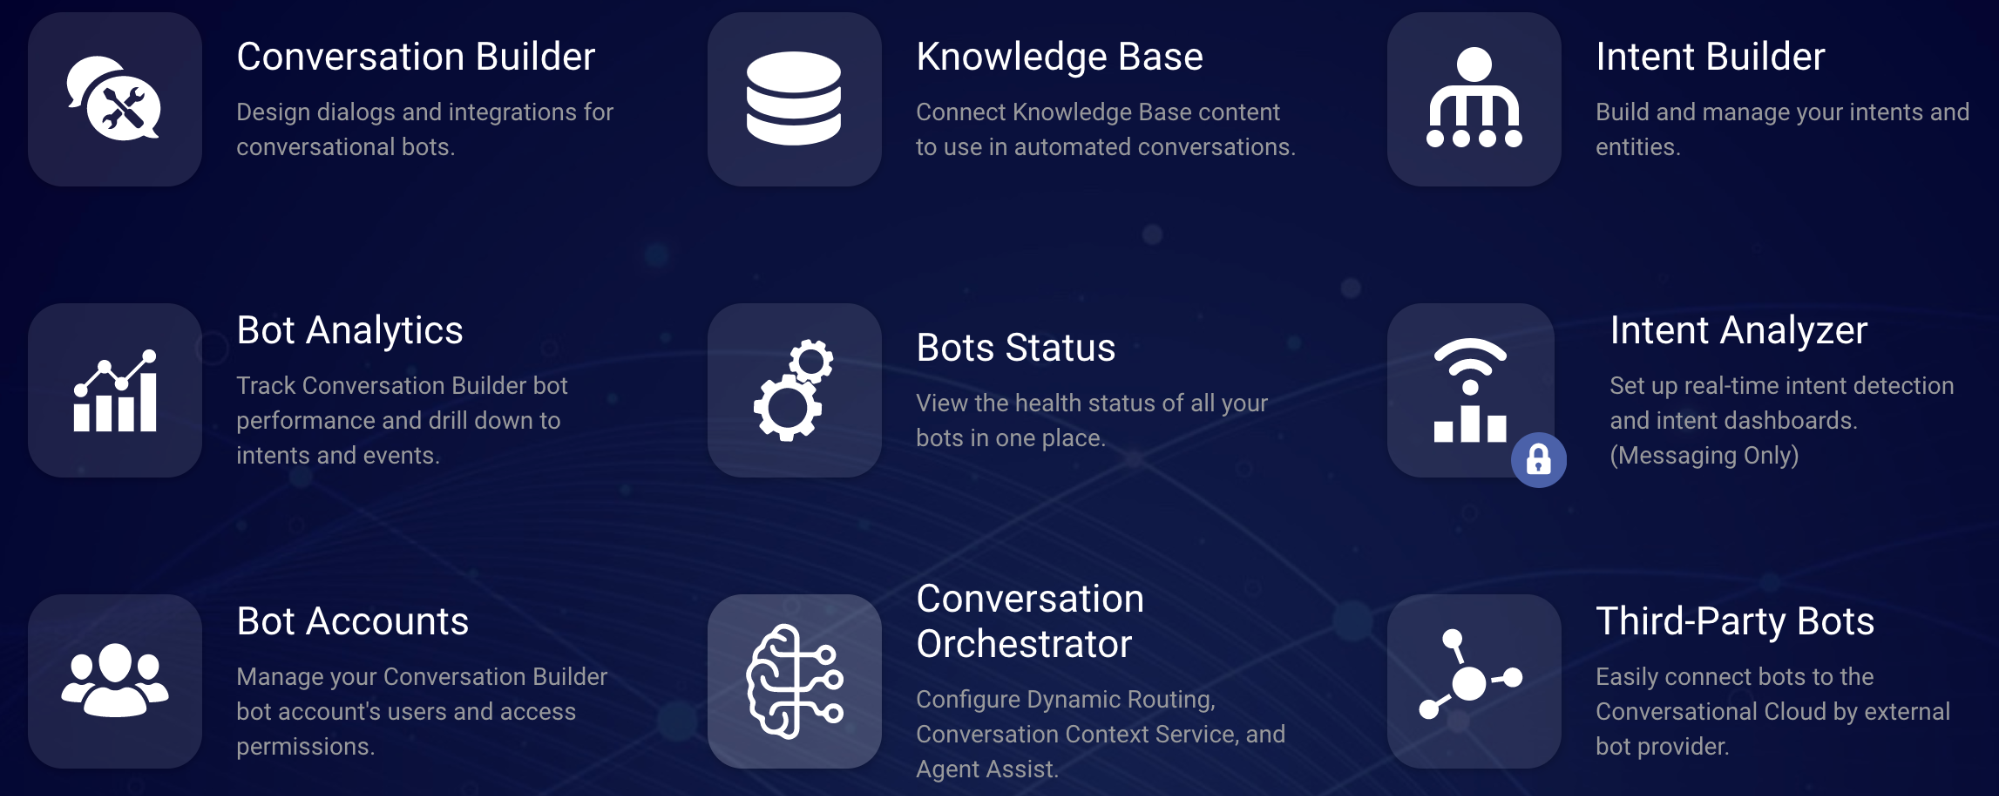 The Conversation Builder option on the dashboard of Conversational AI applications